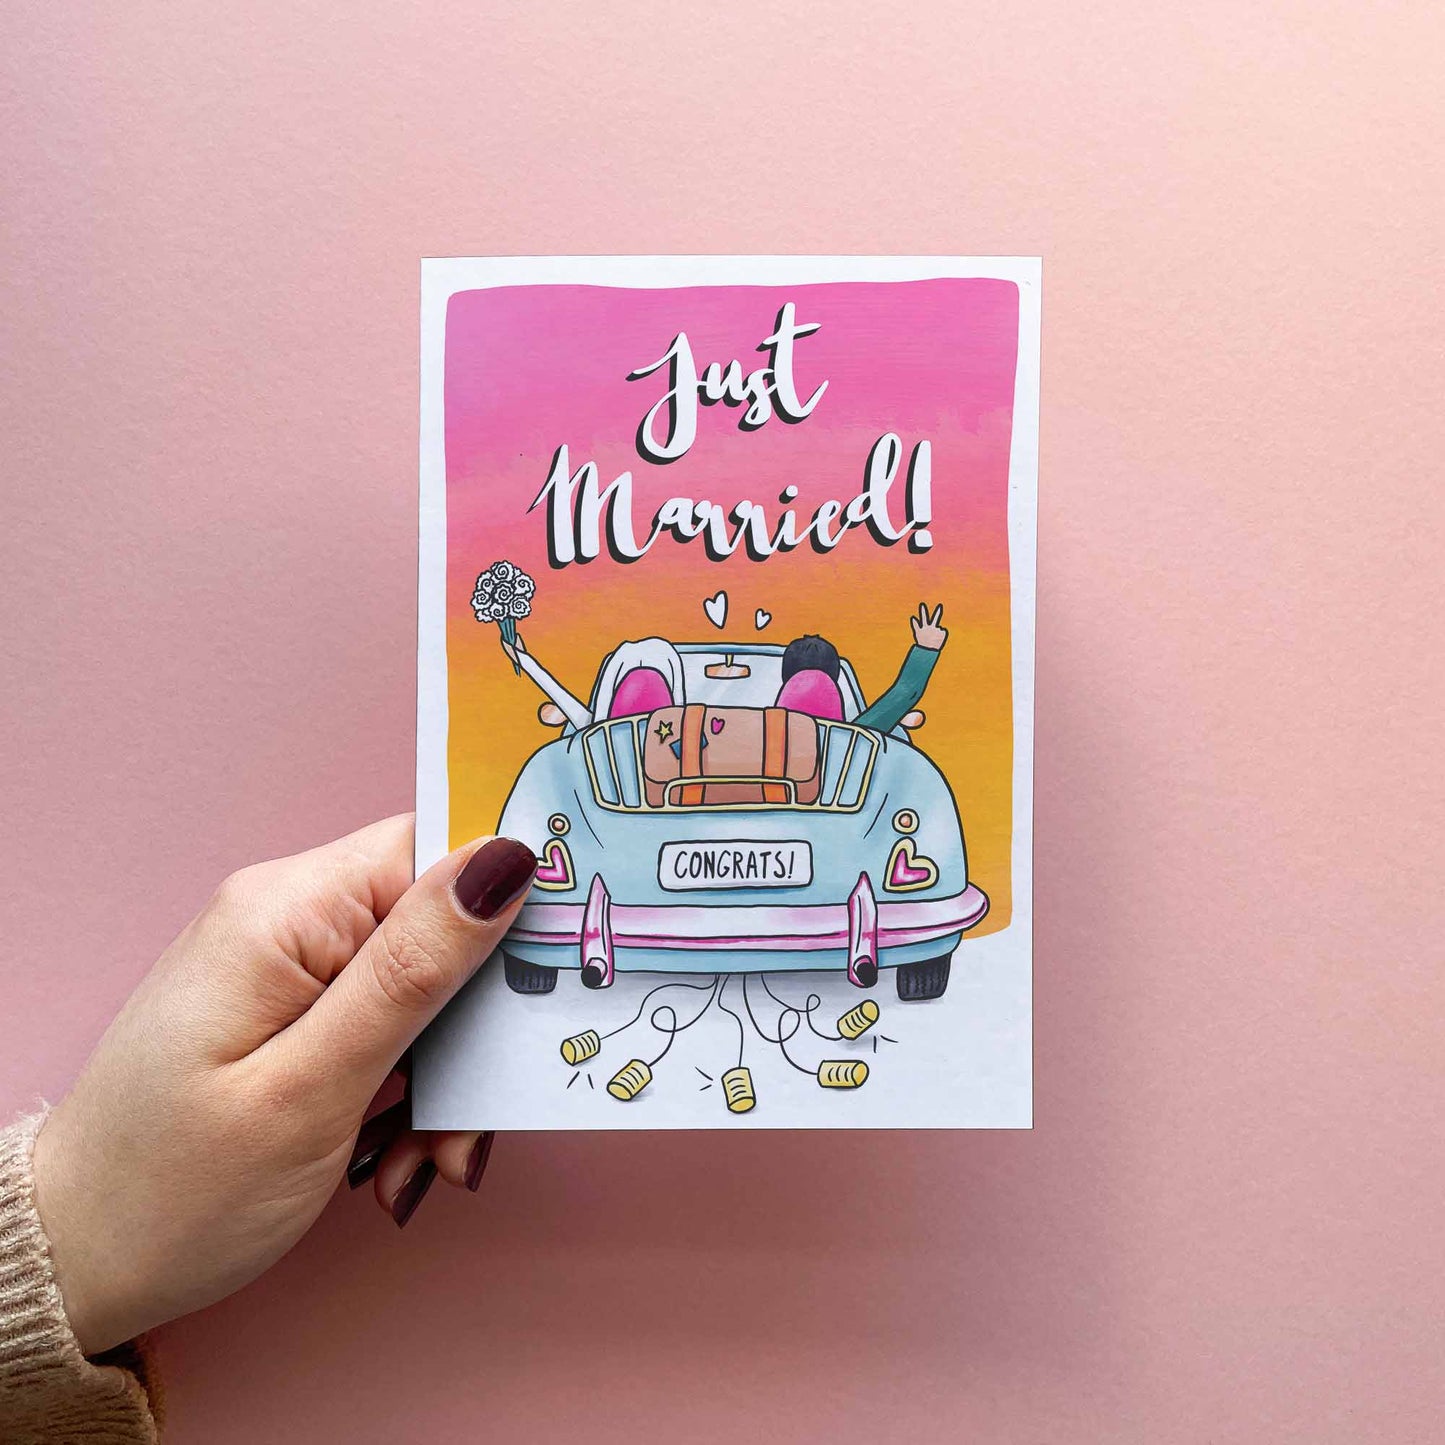 Just Married - Wedding Day Card